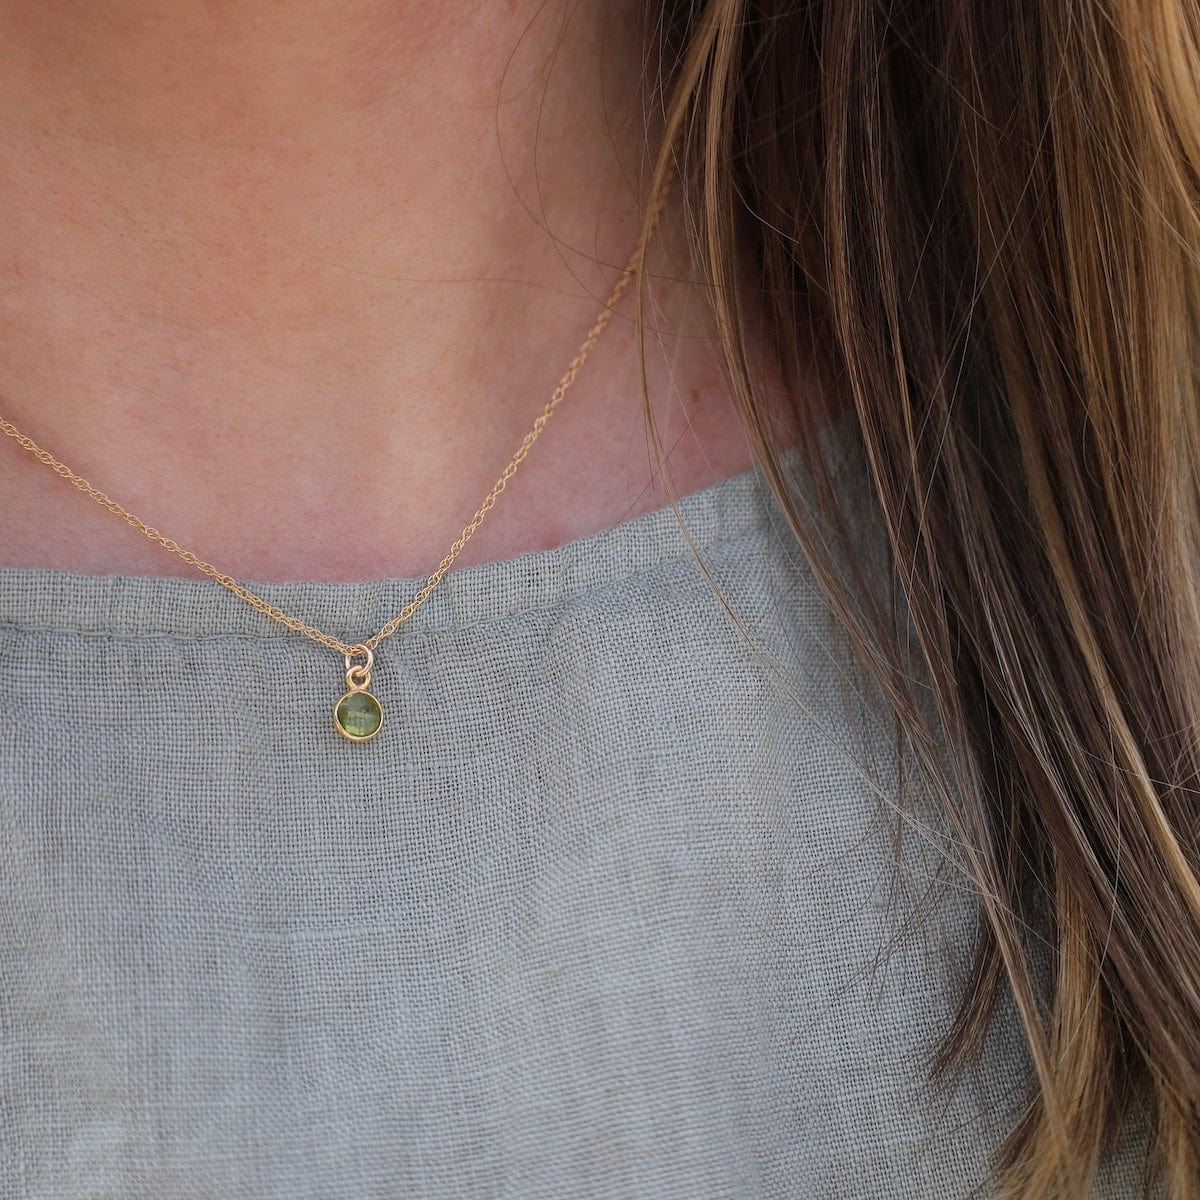 NKL-GF 14k Gold Filled Chain with 6mm Bezel-Set Peridot